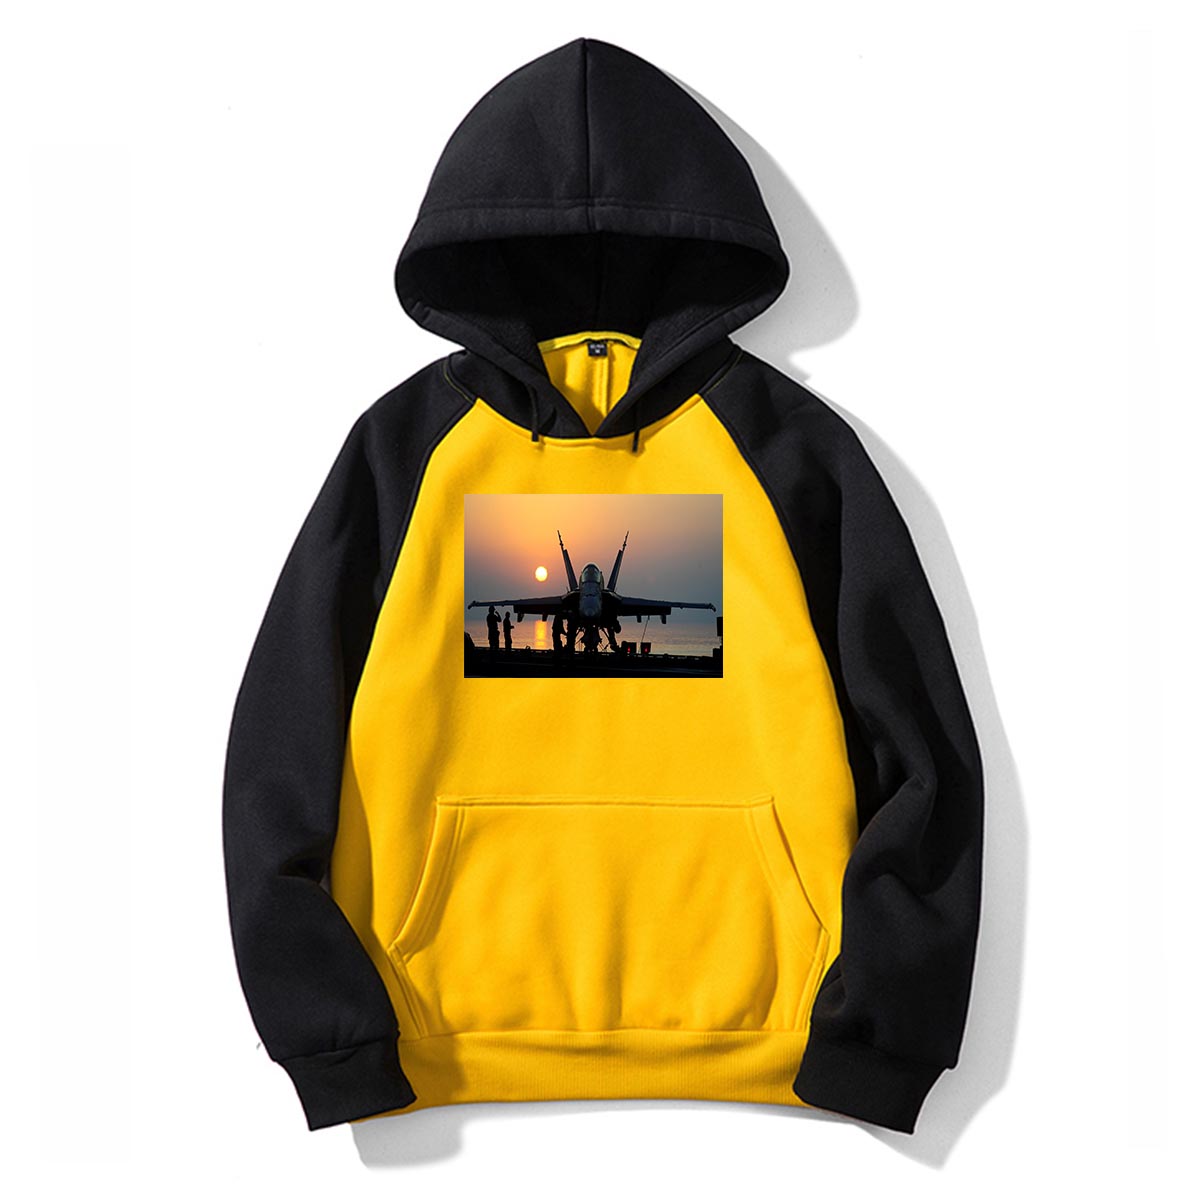 Military Jet During Sunset Designed Colourful Hoodies